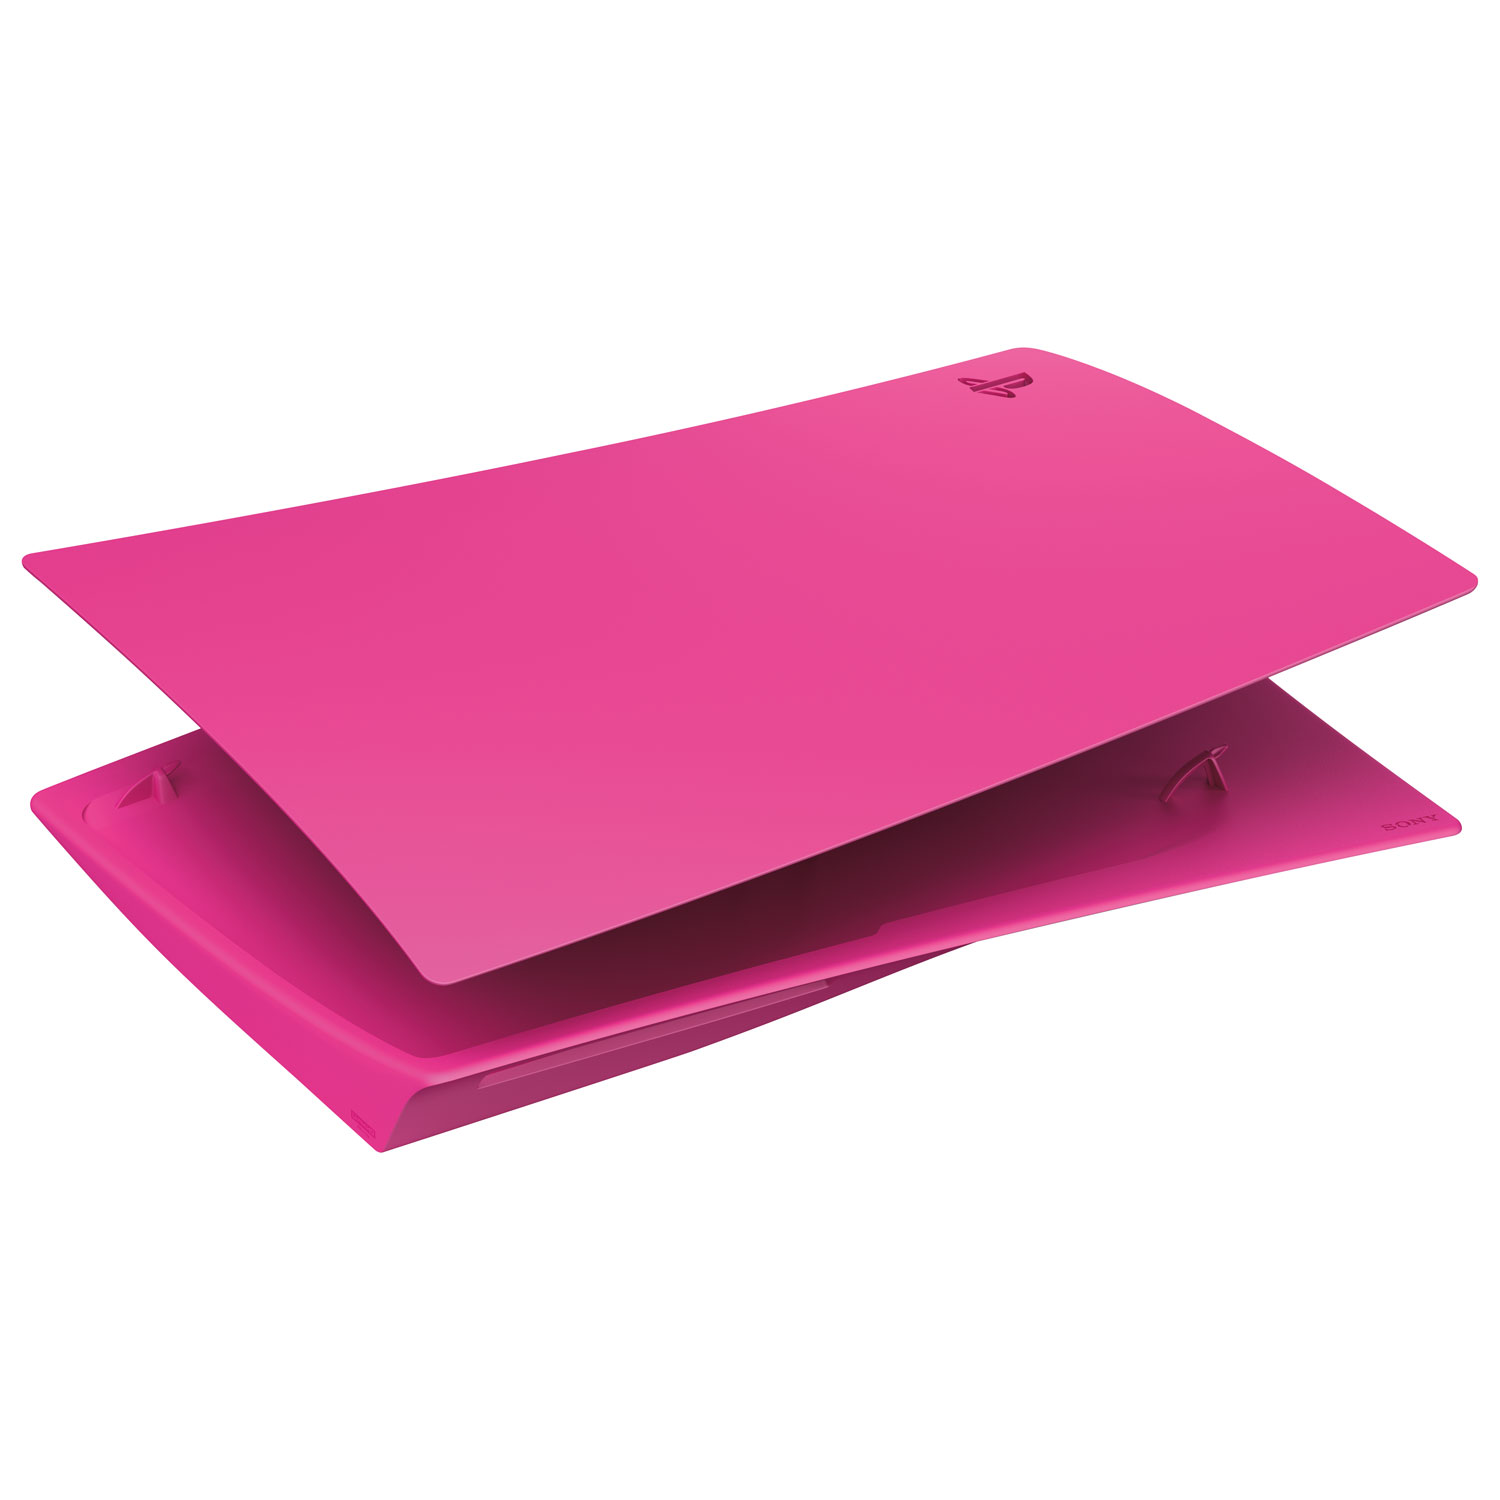 PlayStation 5 Console Cover - Nova Pink